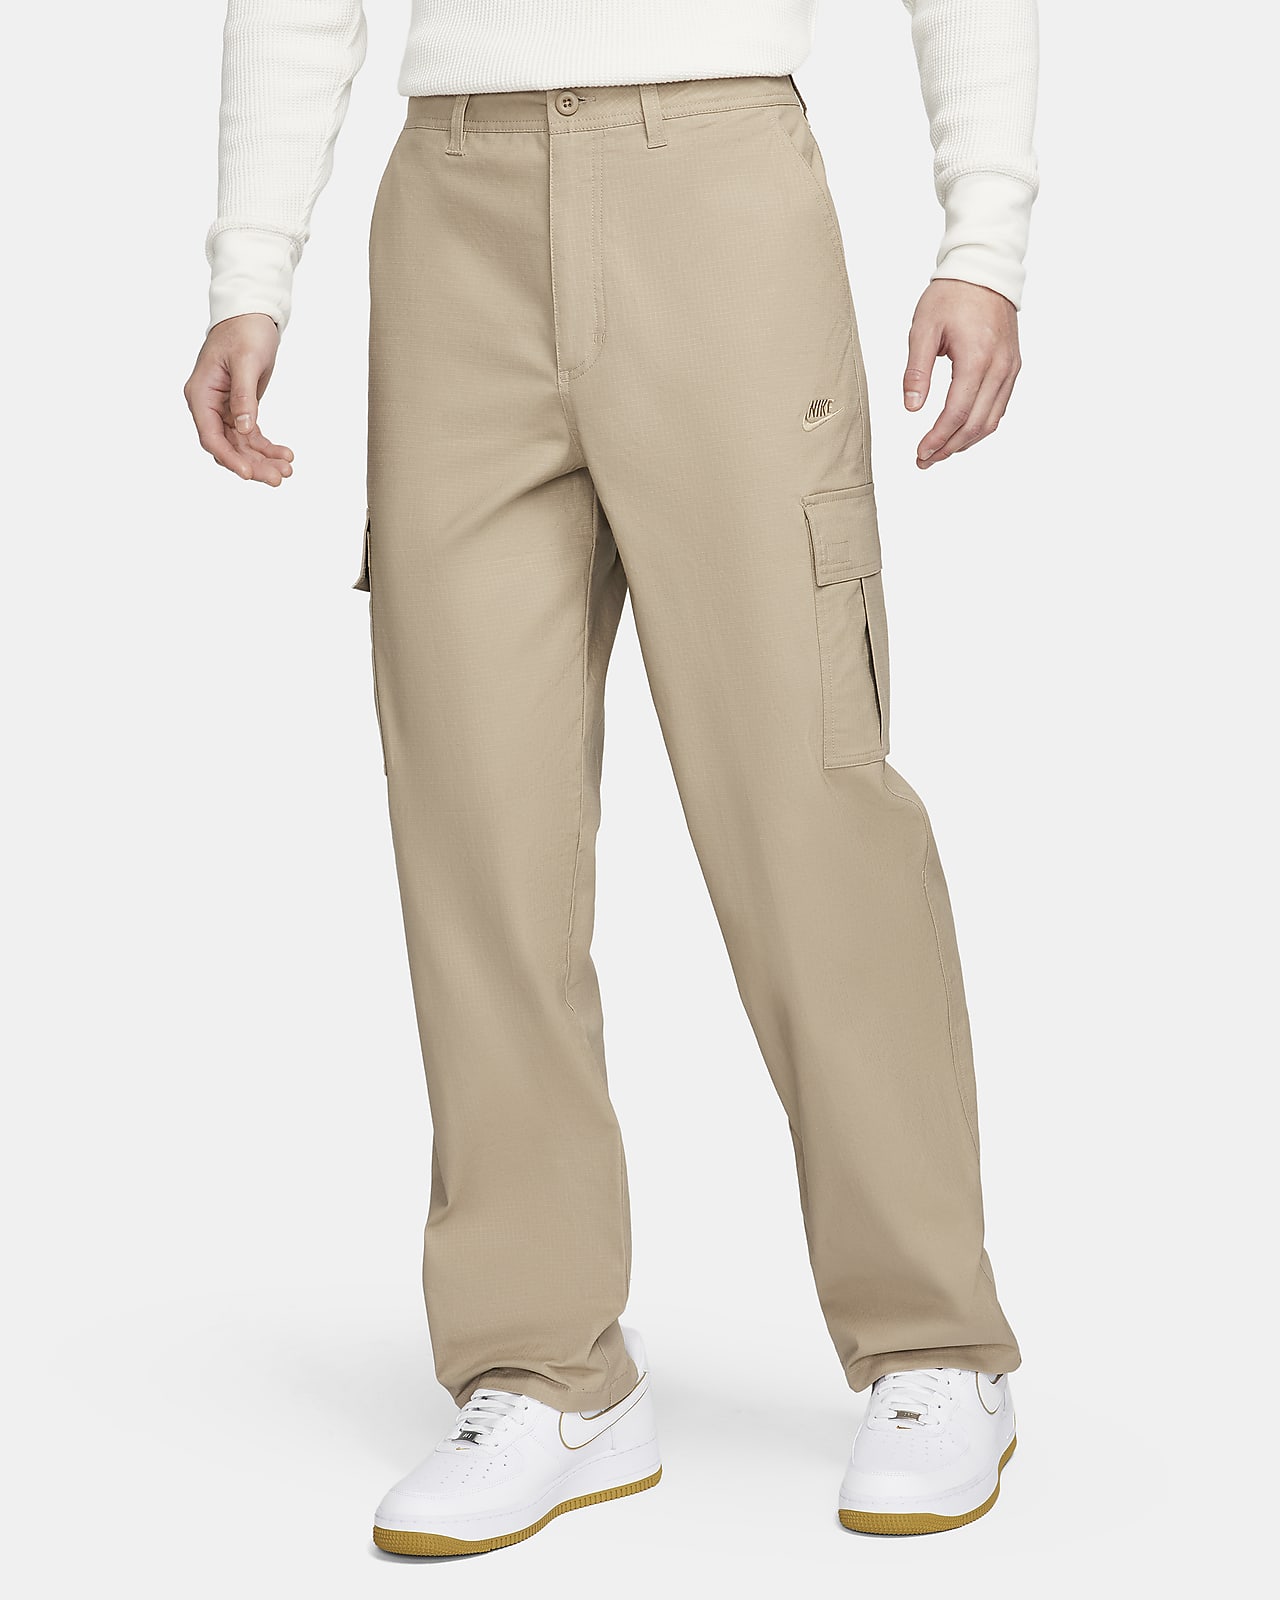 Share more than 230 cargo trousers sports direct latest